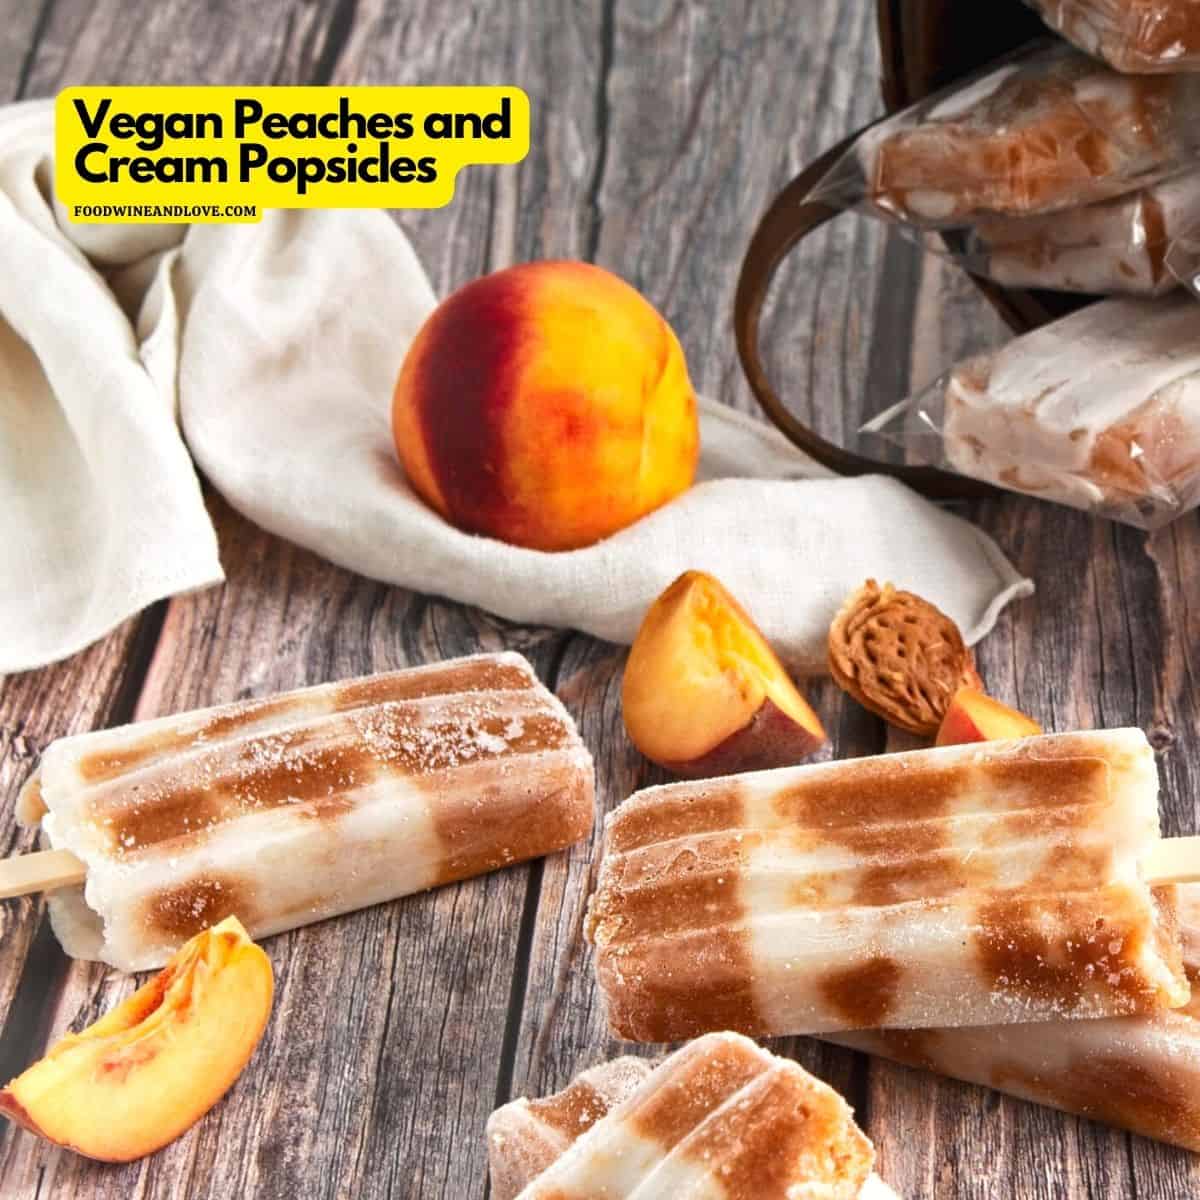 Vegan Peaches and Cream Popsicles, a delicious and healthy dessert or snack idea made with fruit and sweetened with maple syrup.